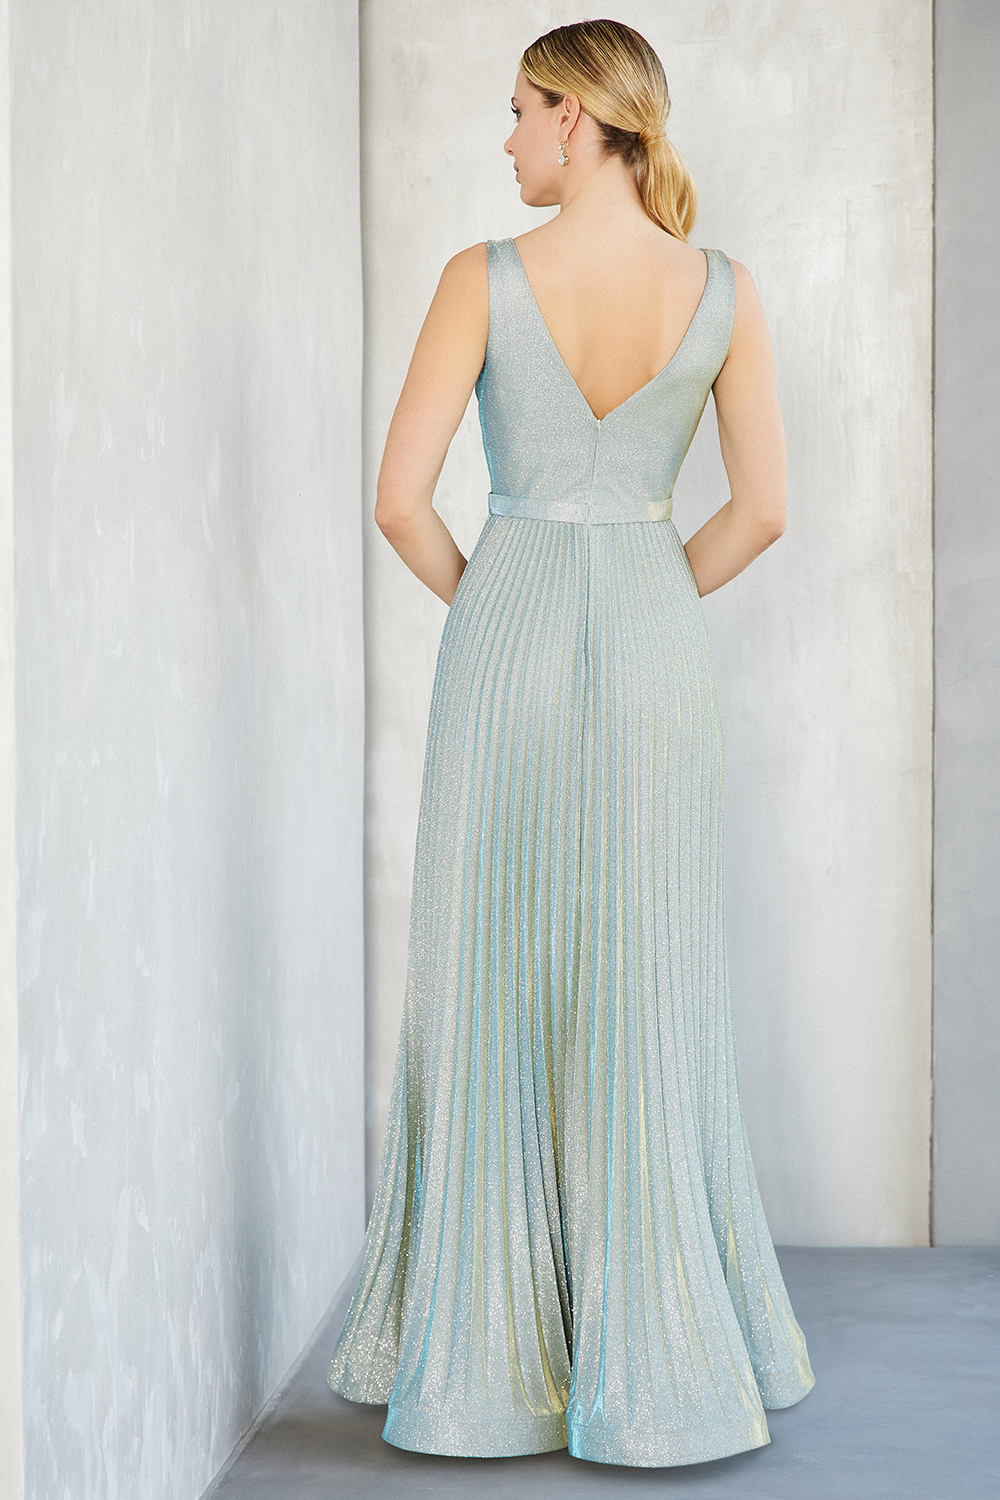 Classic Dresses / Long cocktail pleated dress with shining fabric and wide straps